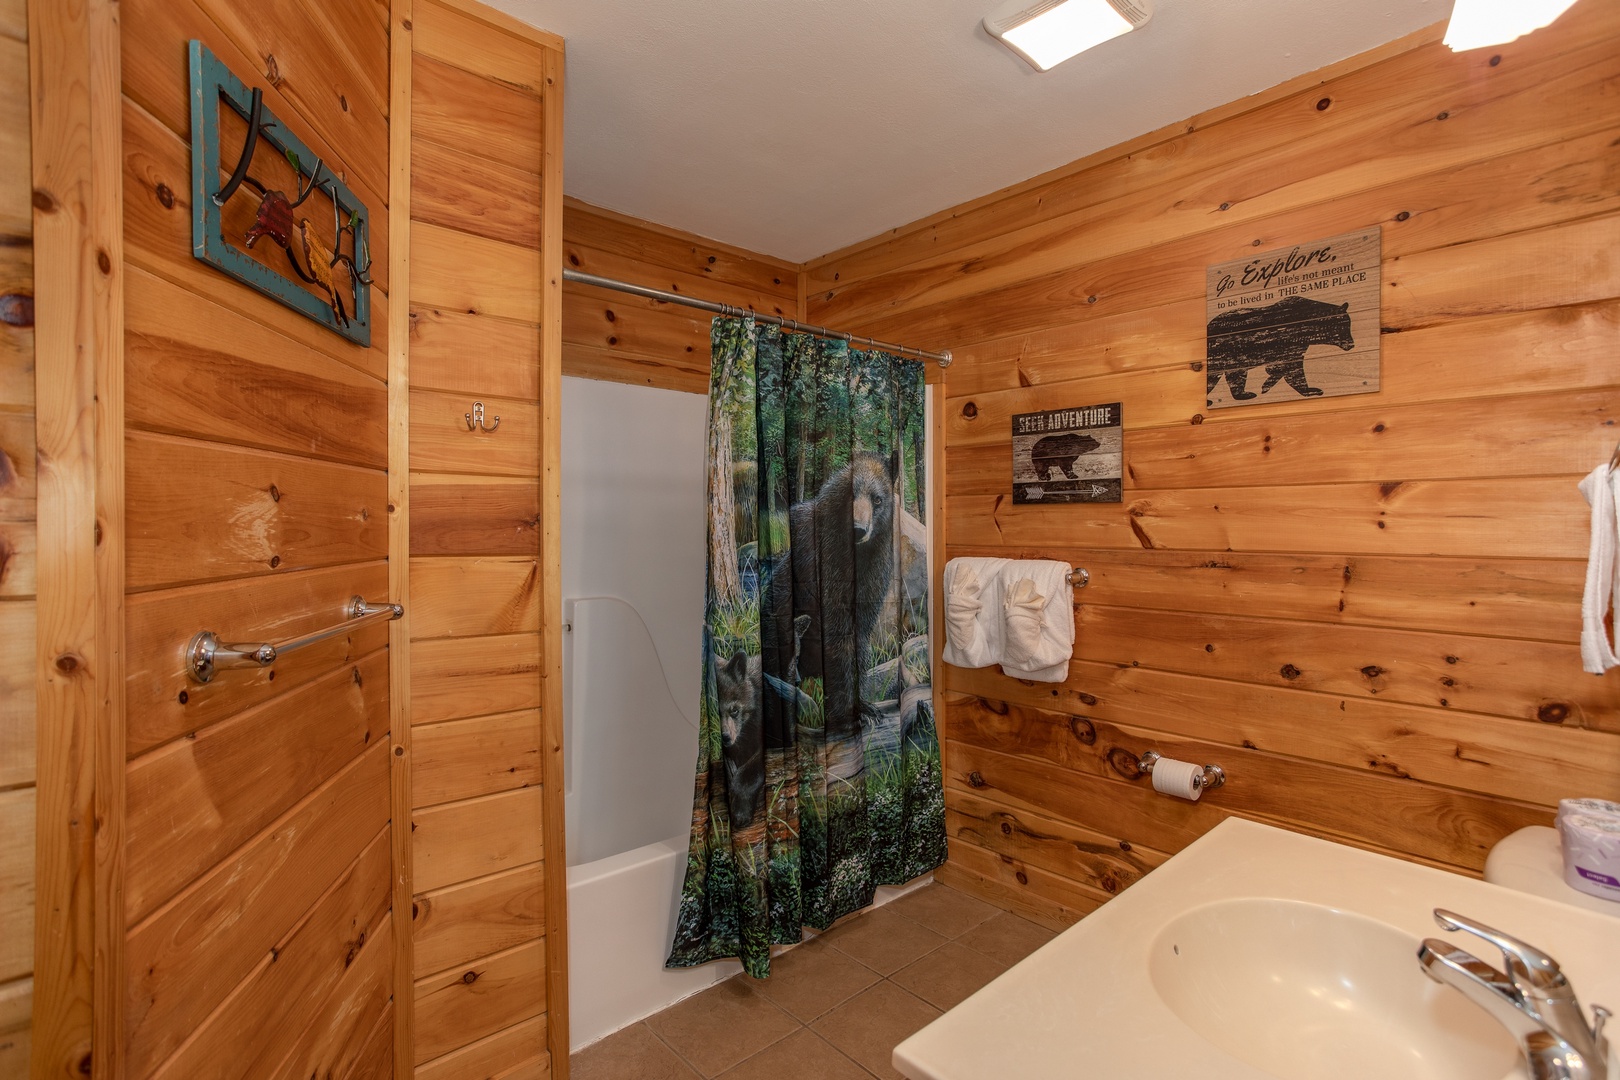 Bathroom with a tub and shower at Mountain Music, a 5 bedroom cabin rental located in Pigeon Forge